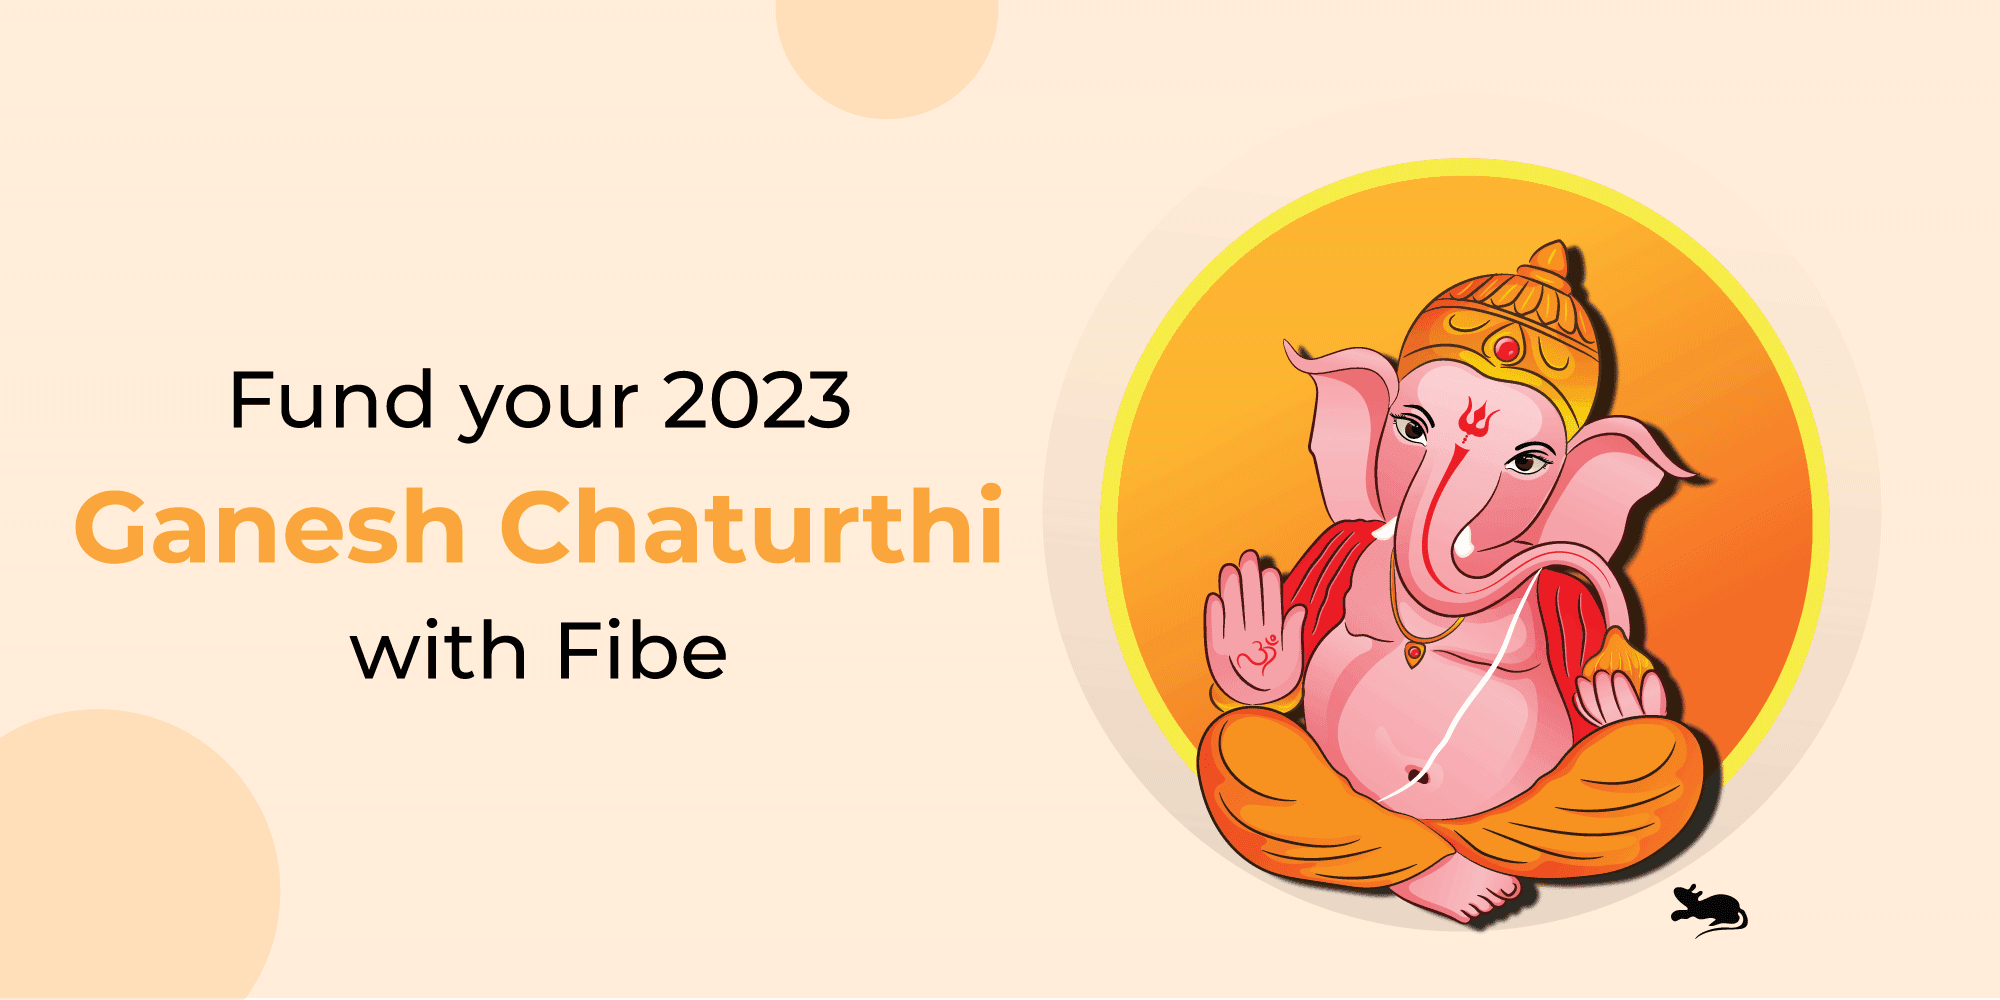 Ganesh Chaturthi Holiday 2023: 5 Tips to Celebrate it With a Fibe Personal Loan